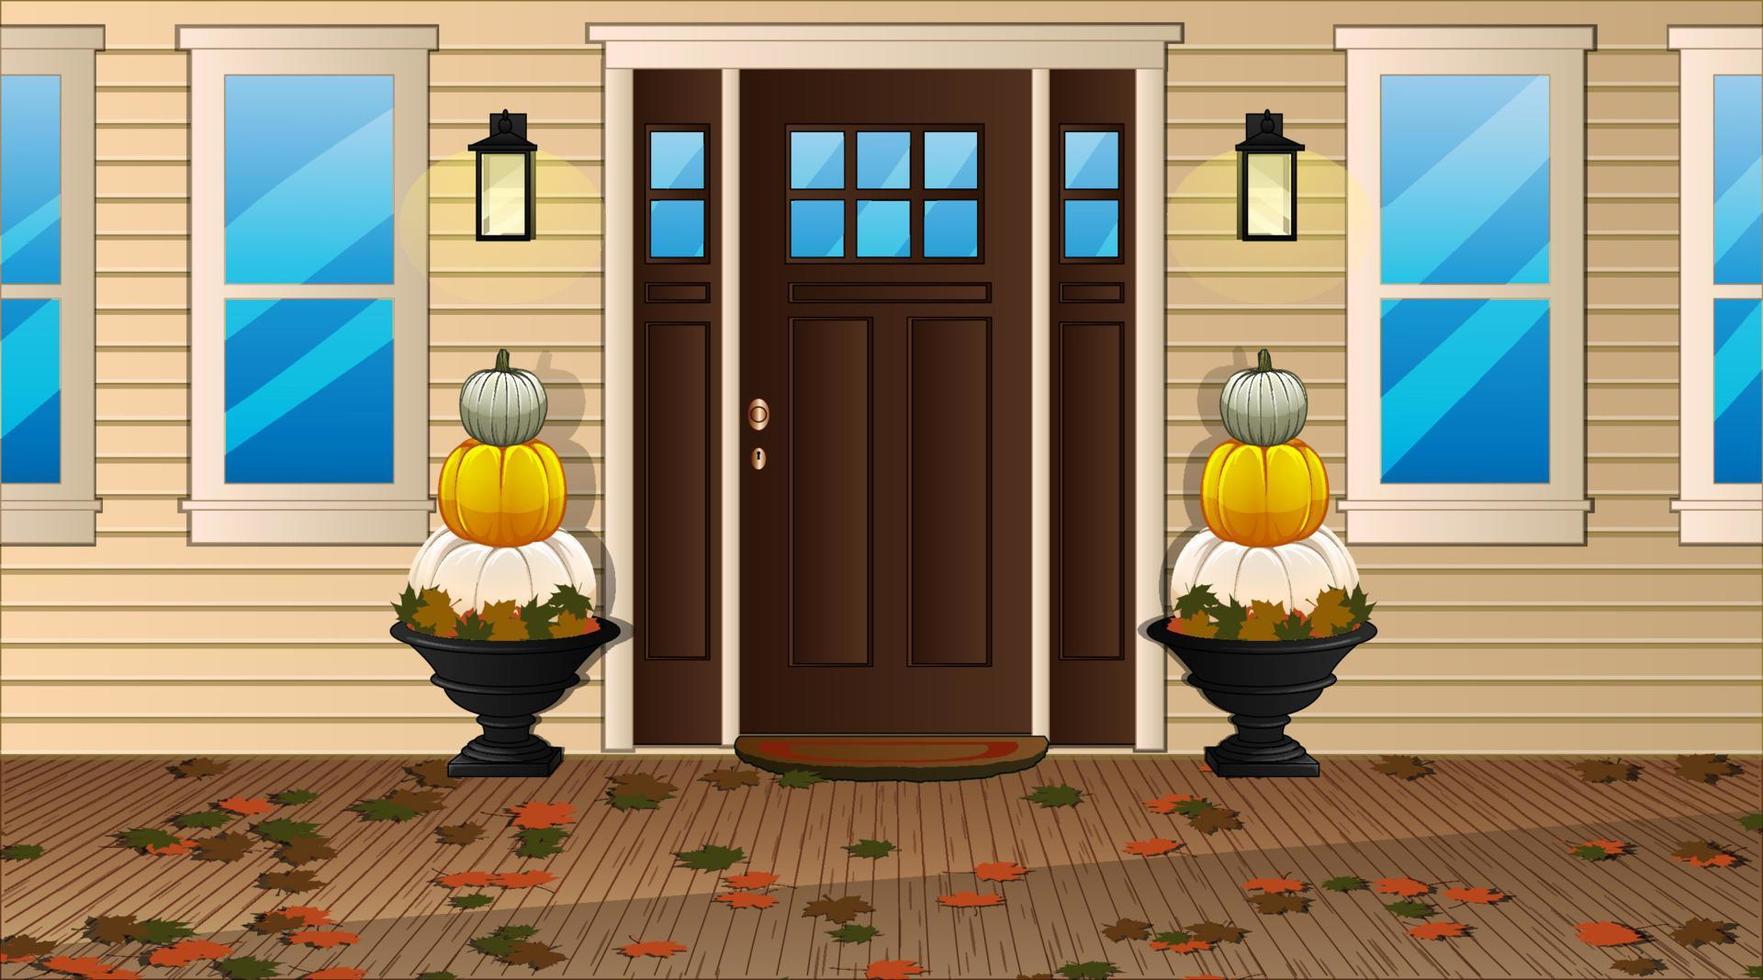 Thanksgiving Background Scene with Front Door Decorated with Pumpkins and Autumn Leaves. Vector Illustration